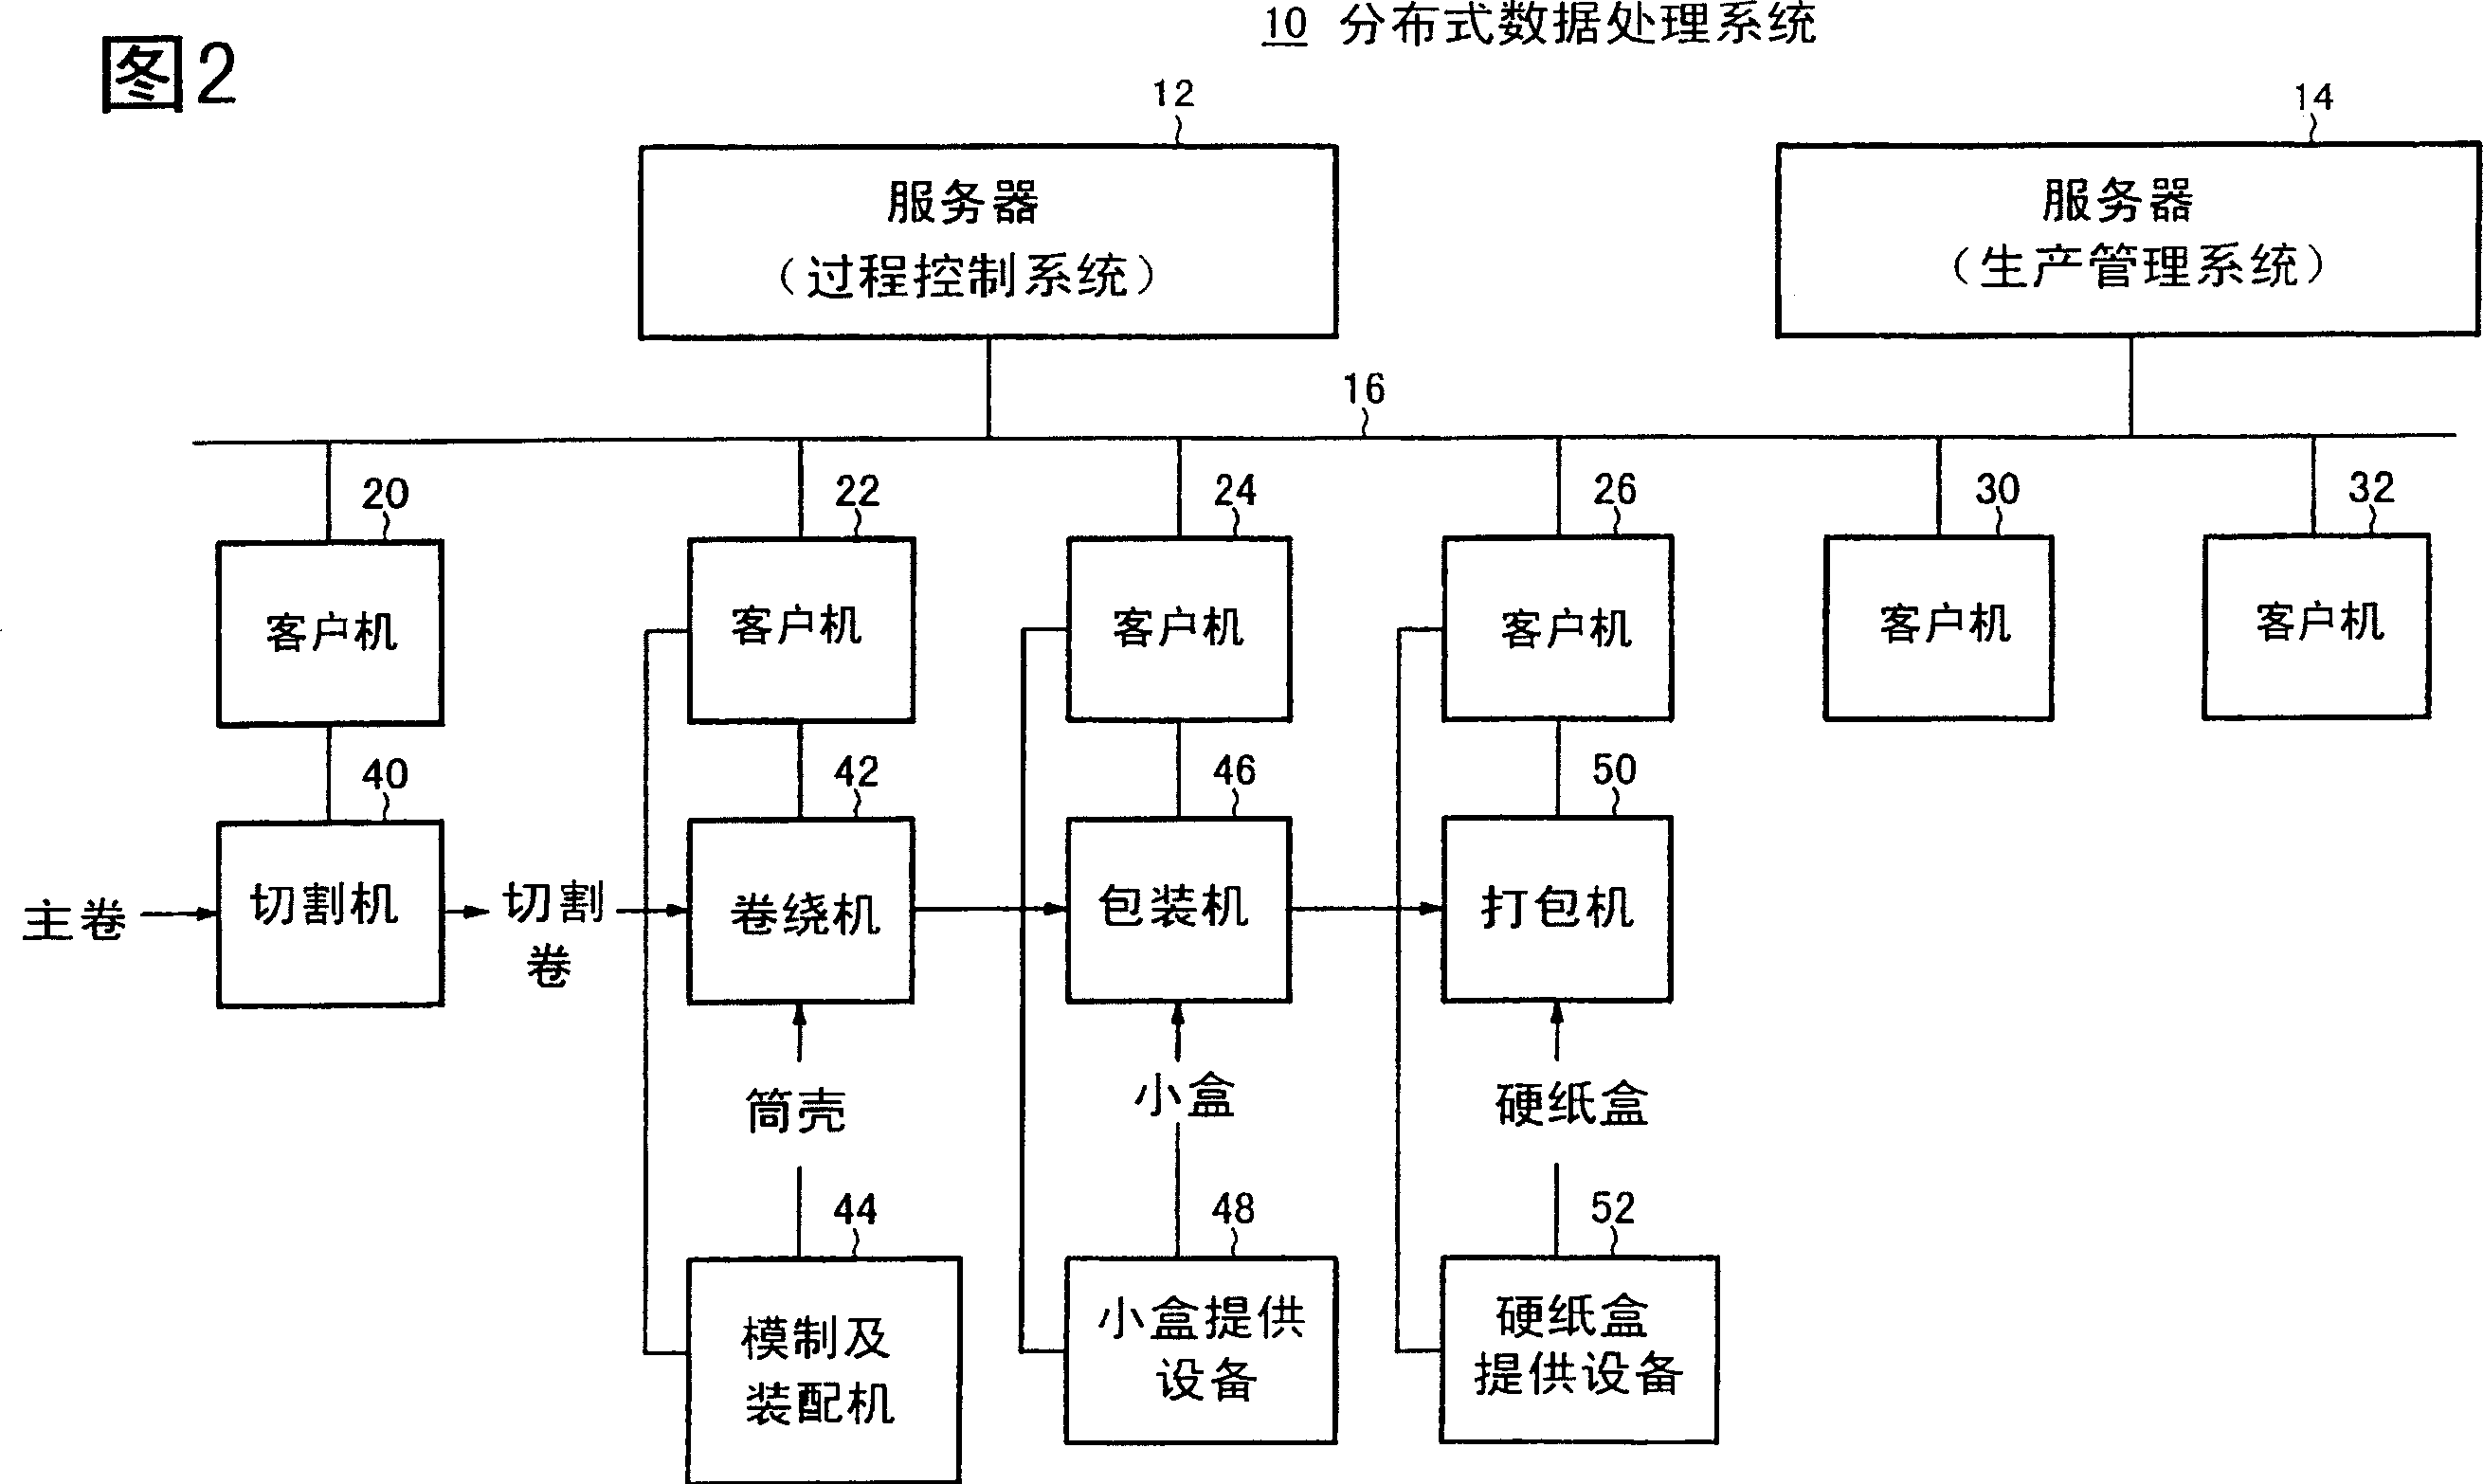 Distribution data processing system and method for processing data in said system